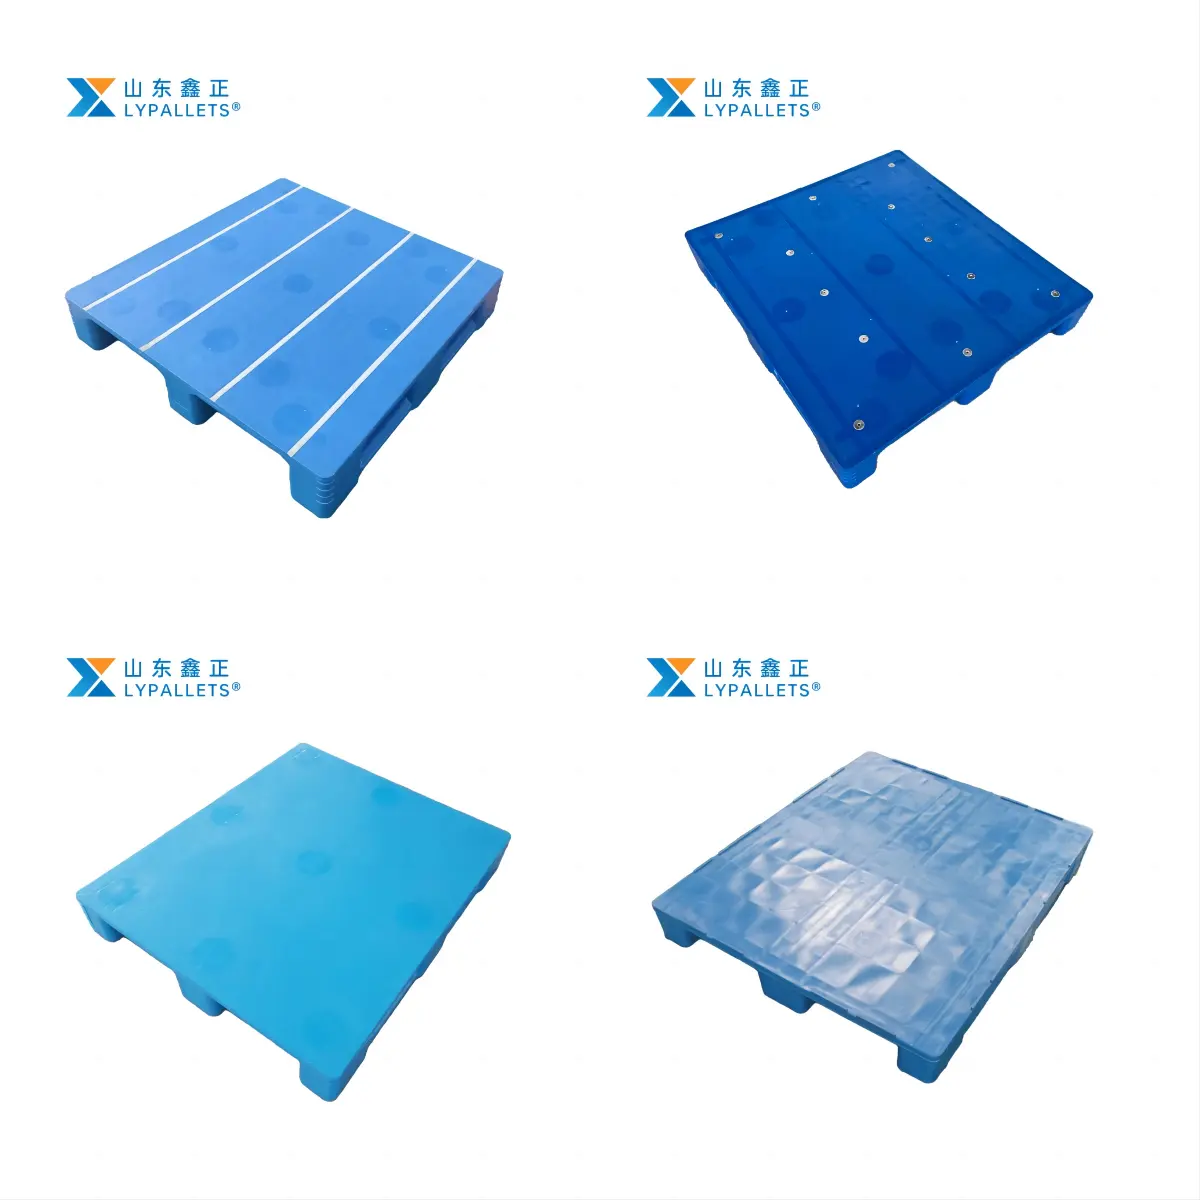 LYPALLETS Closed Surface 3 Runner Pure HDPE/PP Plastic Pallets for Warehouse Racking System